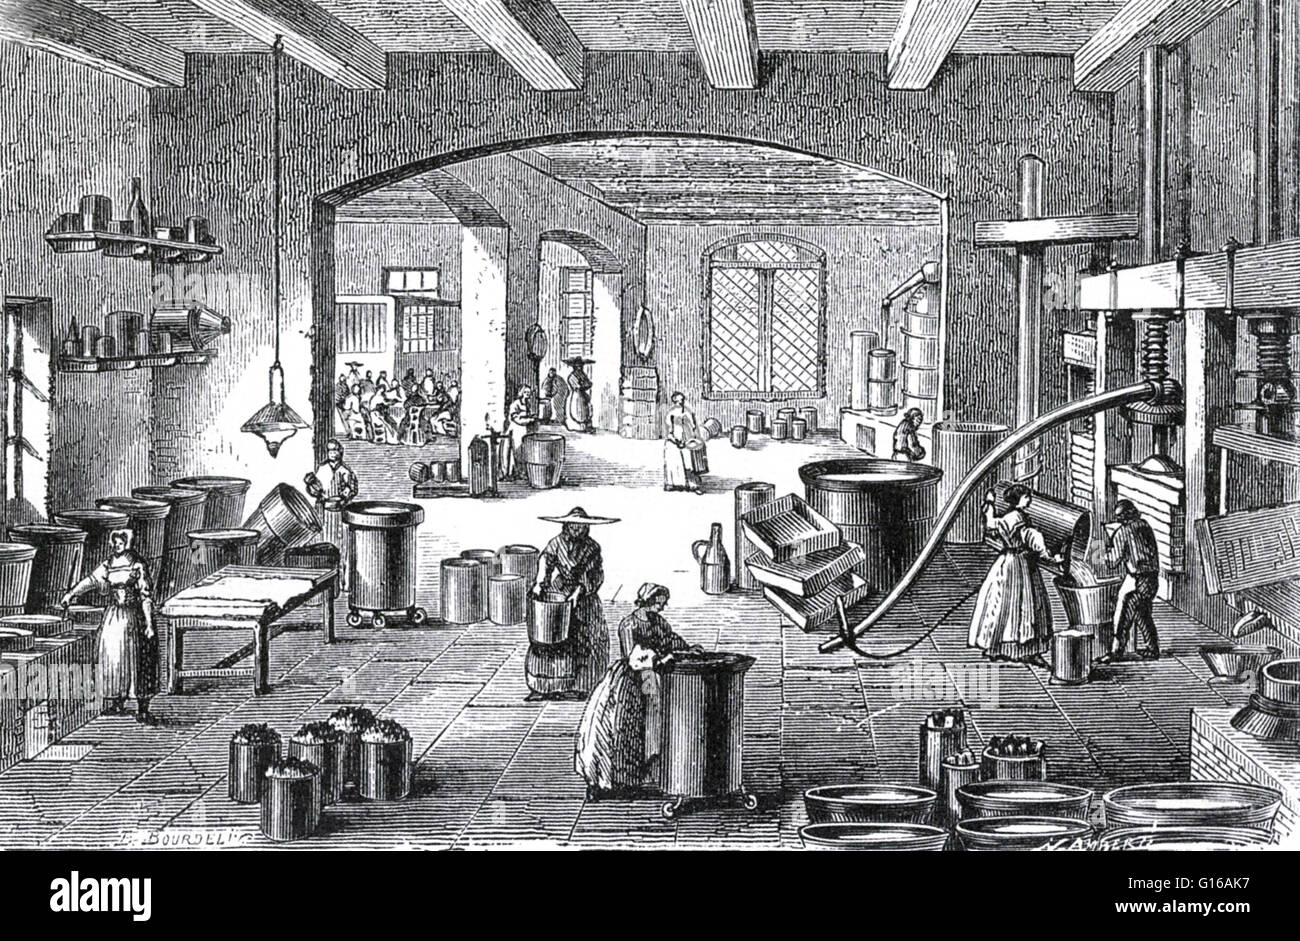 Engraving showing the interior of a perfume manufactory at Nice owned and operated by Eugène Rimmel. As with industry and the arts, perfume was to undergo profound change in the 19th century. Changing tastes and the development of modern chemistry laid th Stock Photo